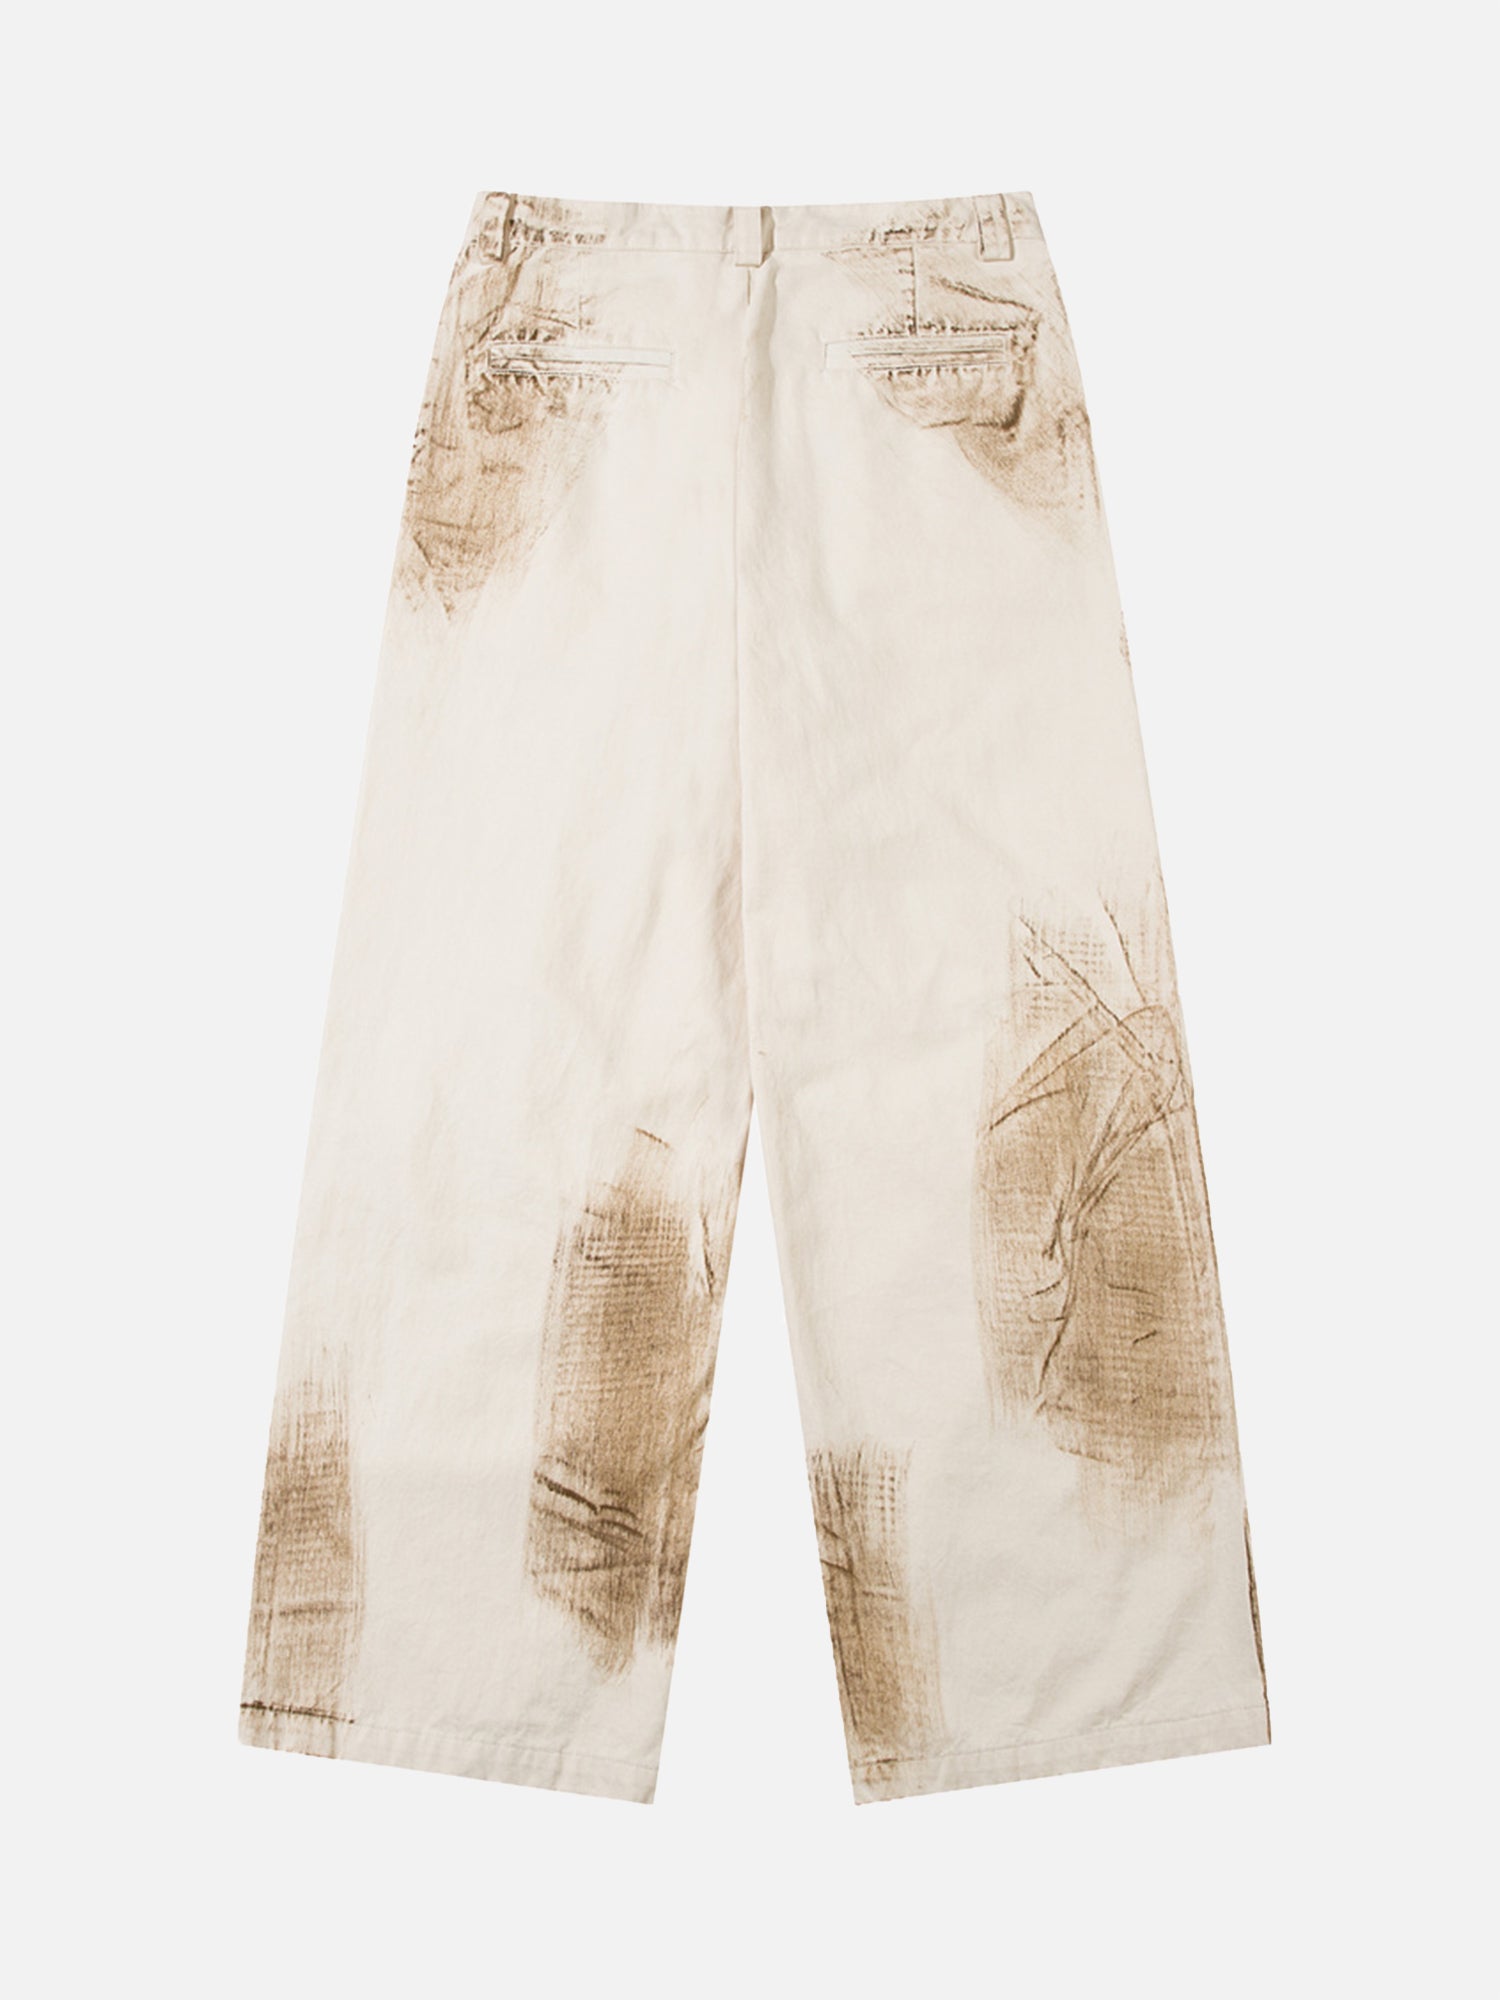 Thesupermade Hip Hop Made Dirty Paint Design Pleated Casual Pants